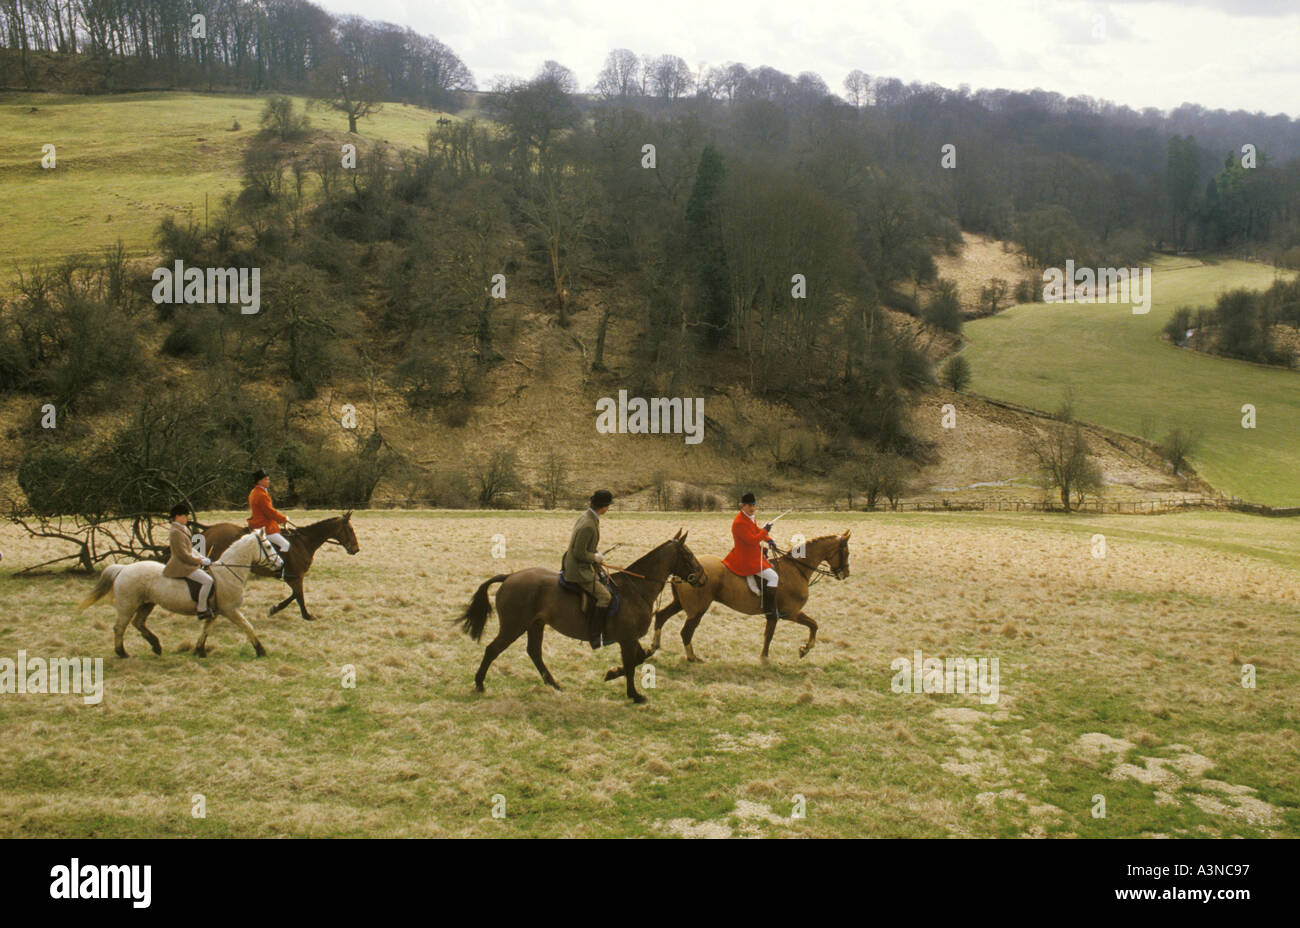 Foxhunting Fox hunting with Hounds The Vale of White Horse an English premier hunt based in Wiltshire 1980s 1985 UK HOMER SYKES Stock Photo